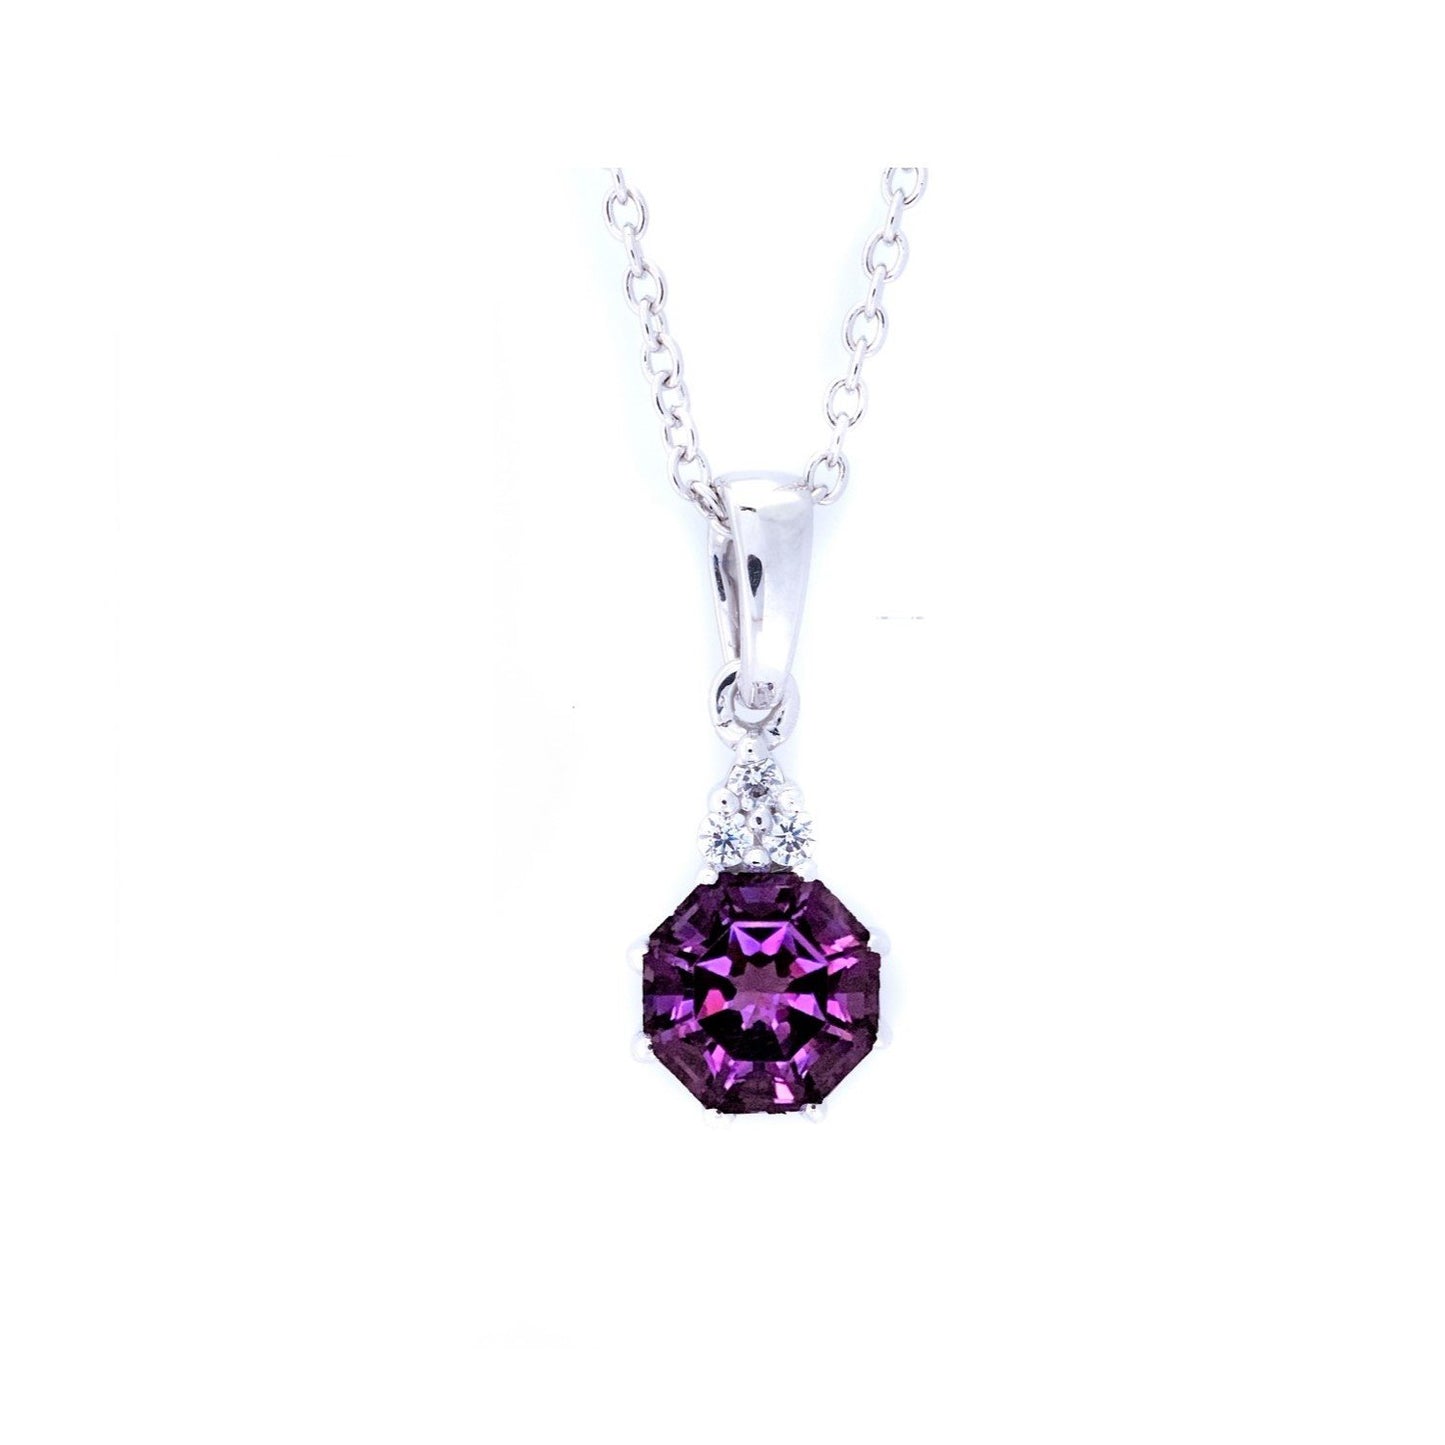 FARA Amethyst & Natural White Zircon Pendant Necklace Sterling Silver 18 inch chain with extender for Women